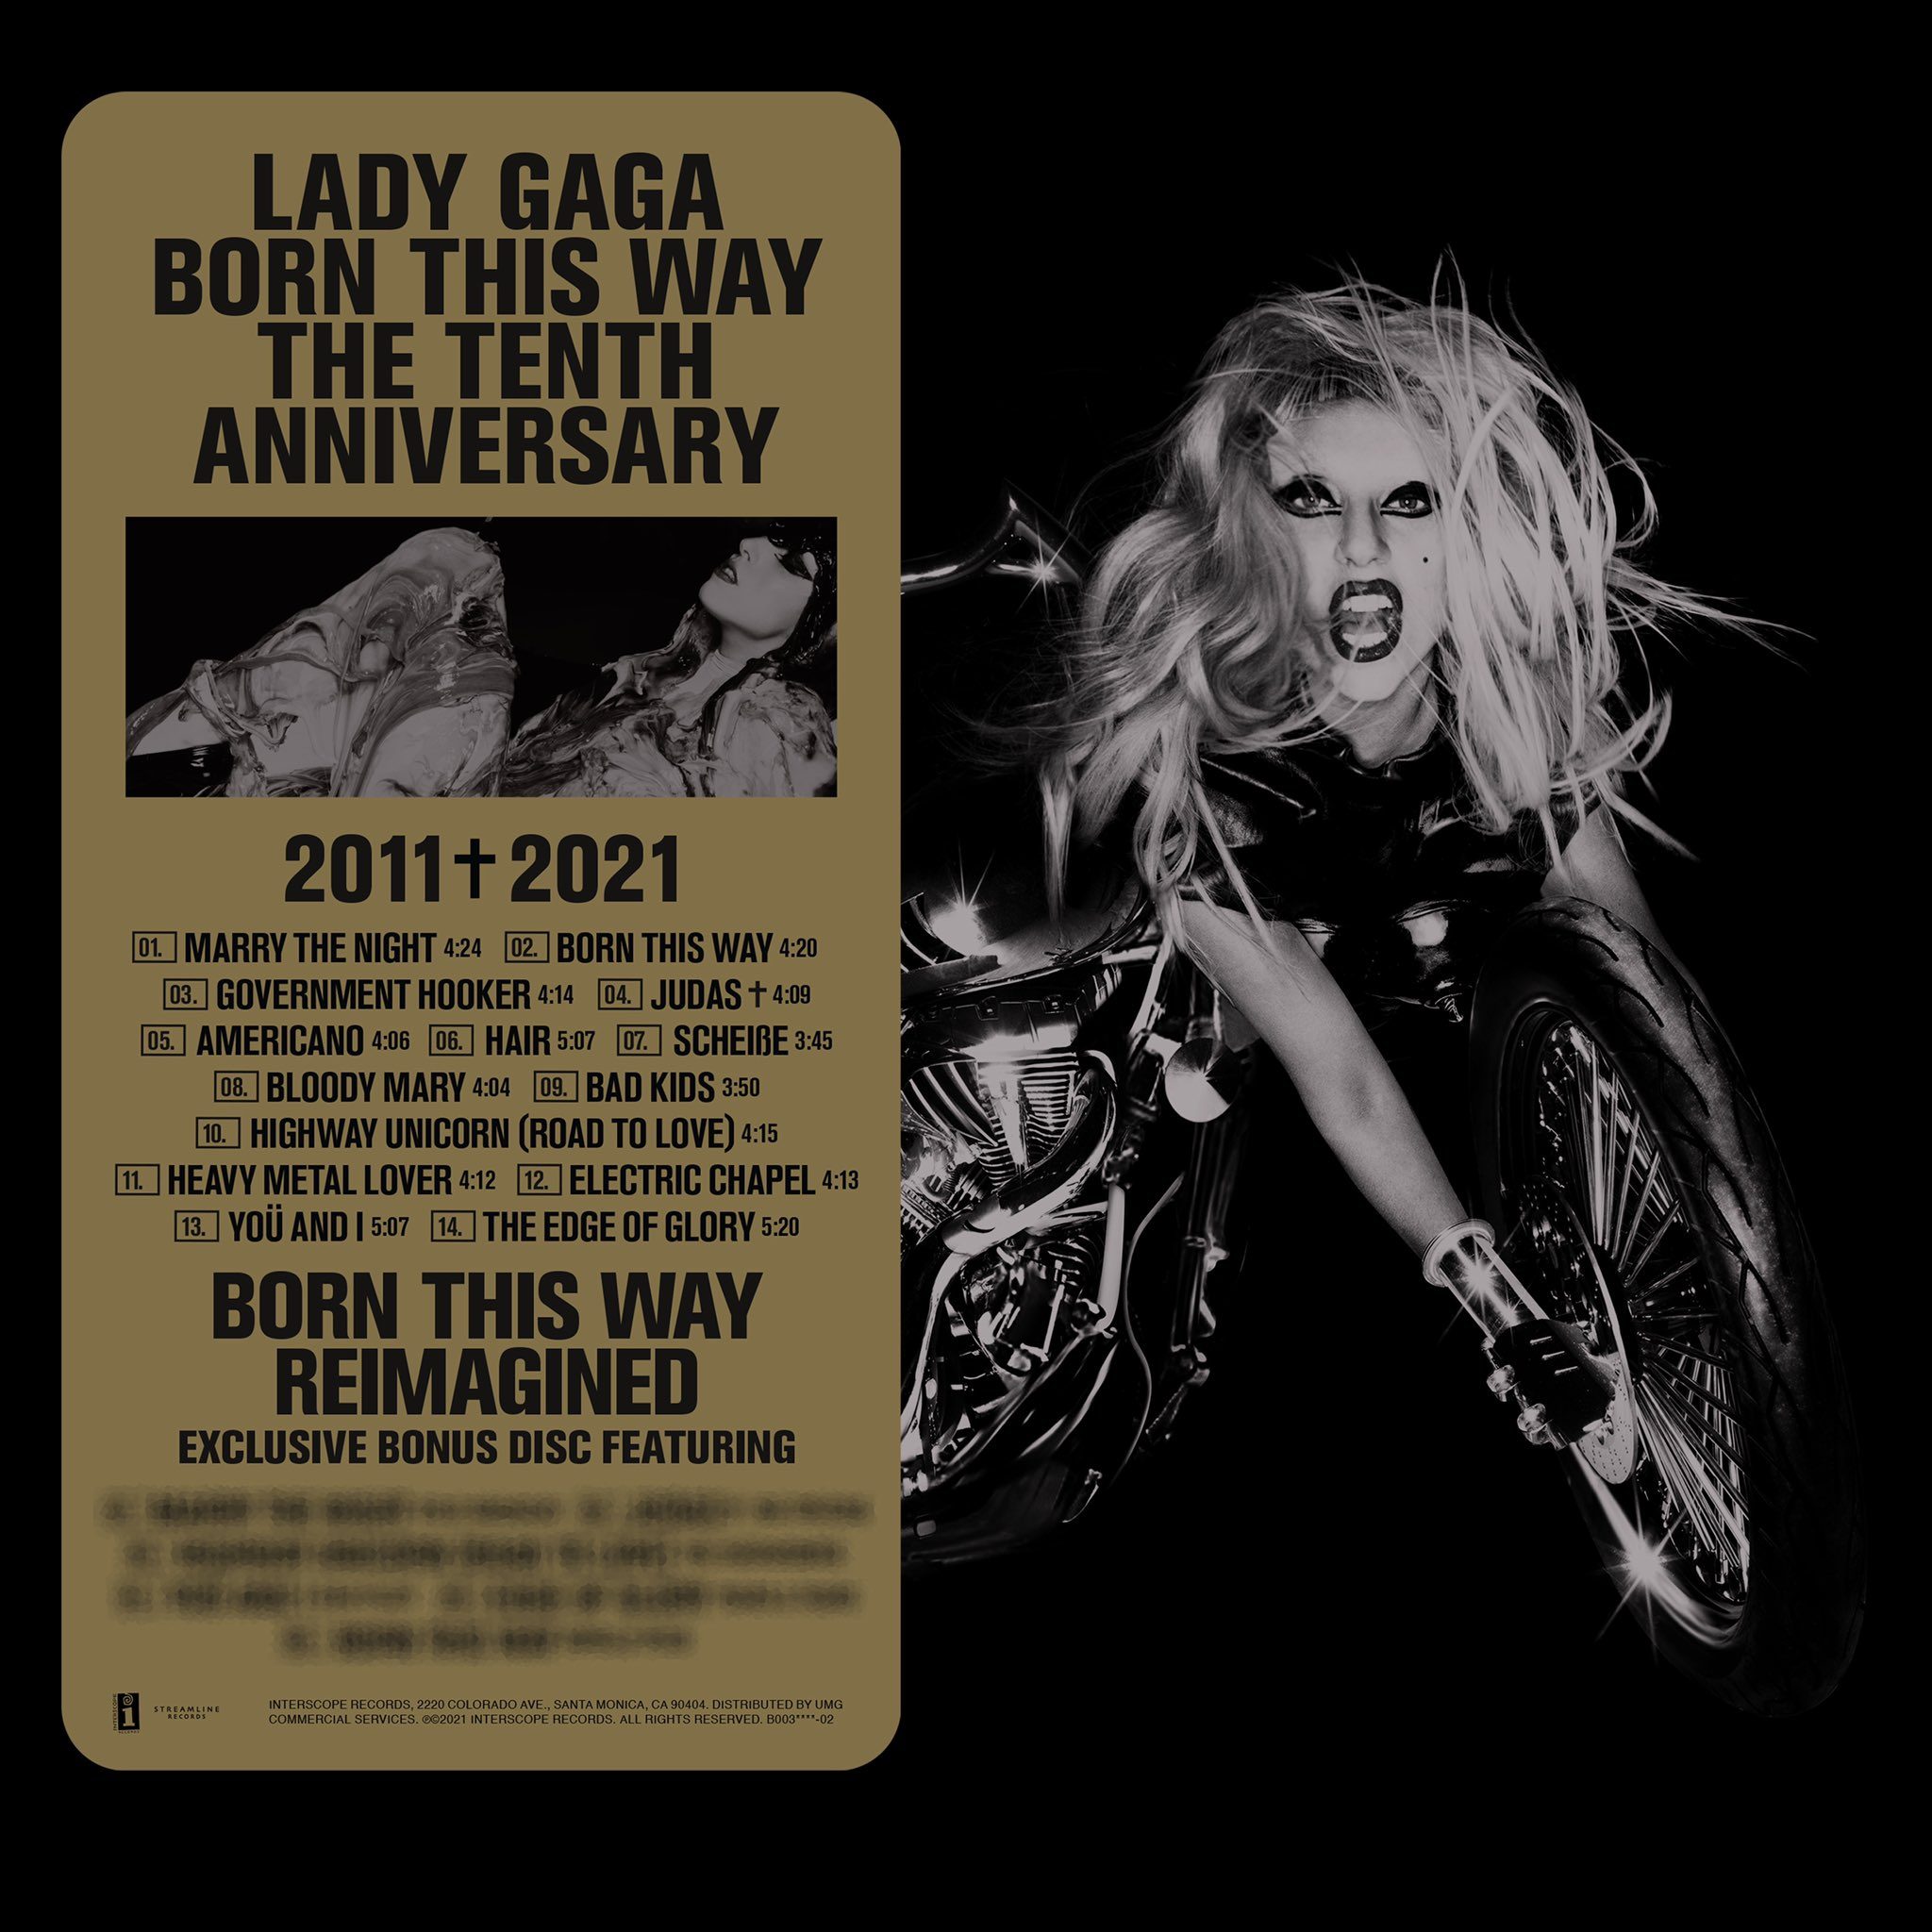 Lady Gaga to release ‘Born This Way’ special edition for album’s 10th anniversary